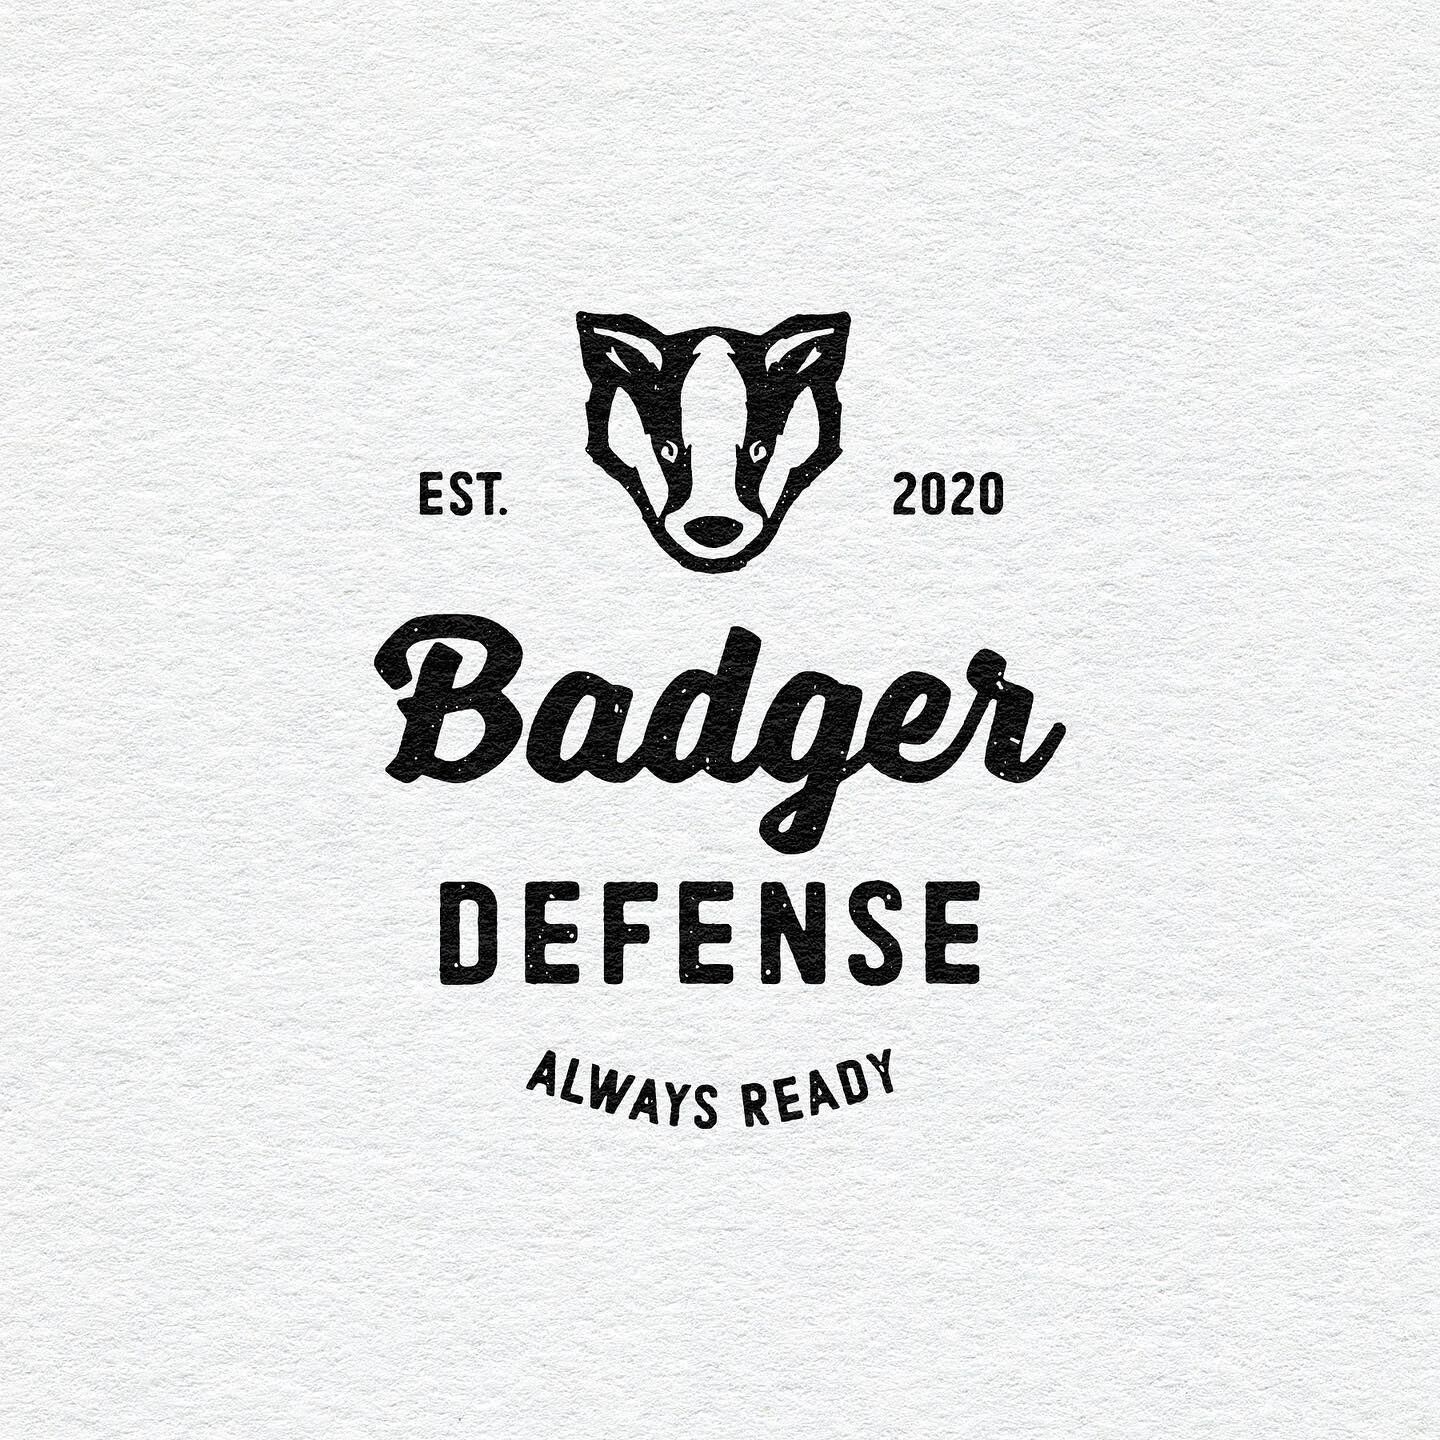 Fun identity system I recently completed for Badger Defense. I was tasked with creating a responsive identity that felt industrial and vintage. 
. . 
. .
. .
#branding #worldpackagingdesign #thedieline #brandidentity #identity #graphicdesign #illustr